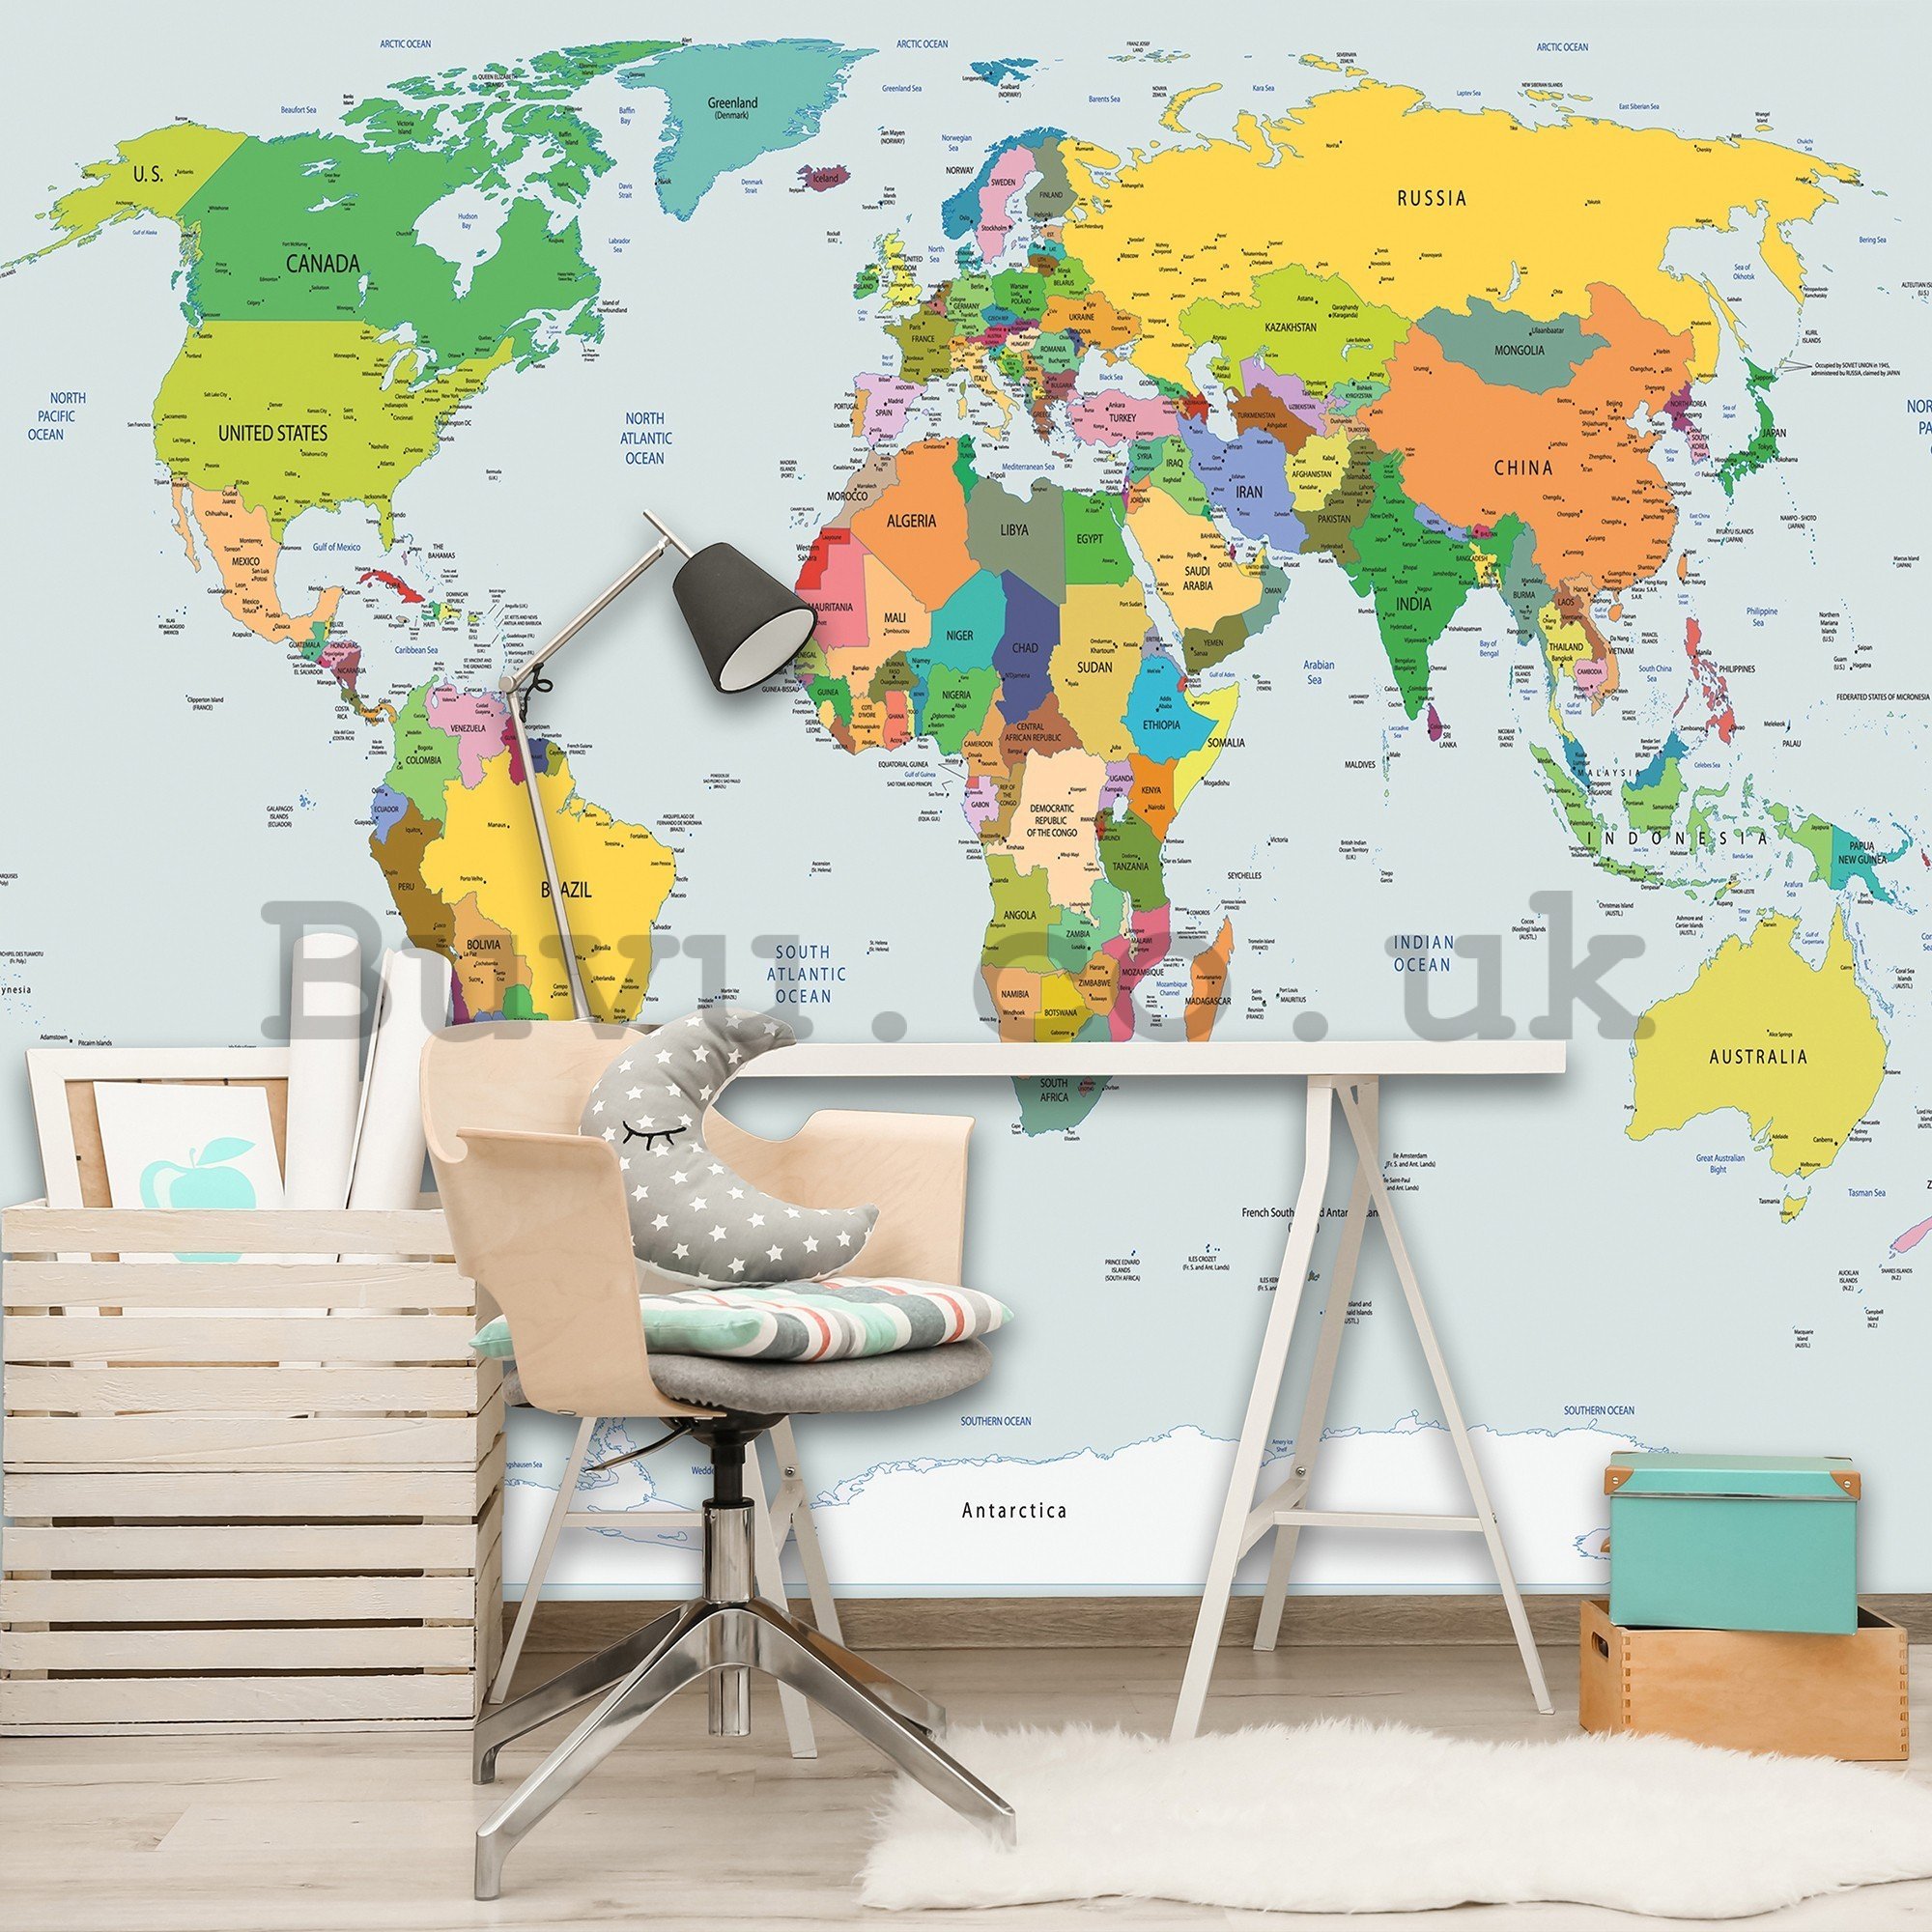 Wall mural vlies: Map of the world (2) - 416x254 cm